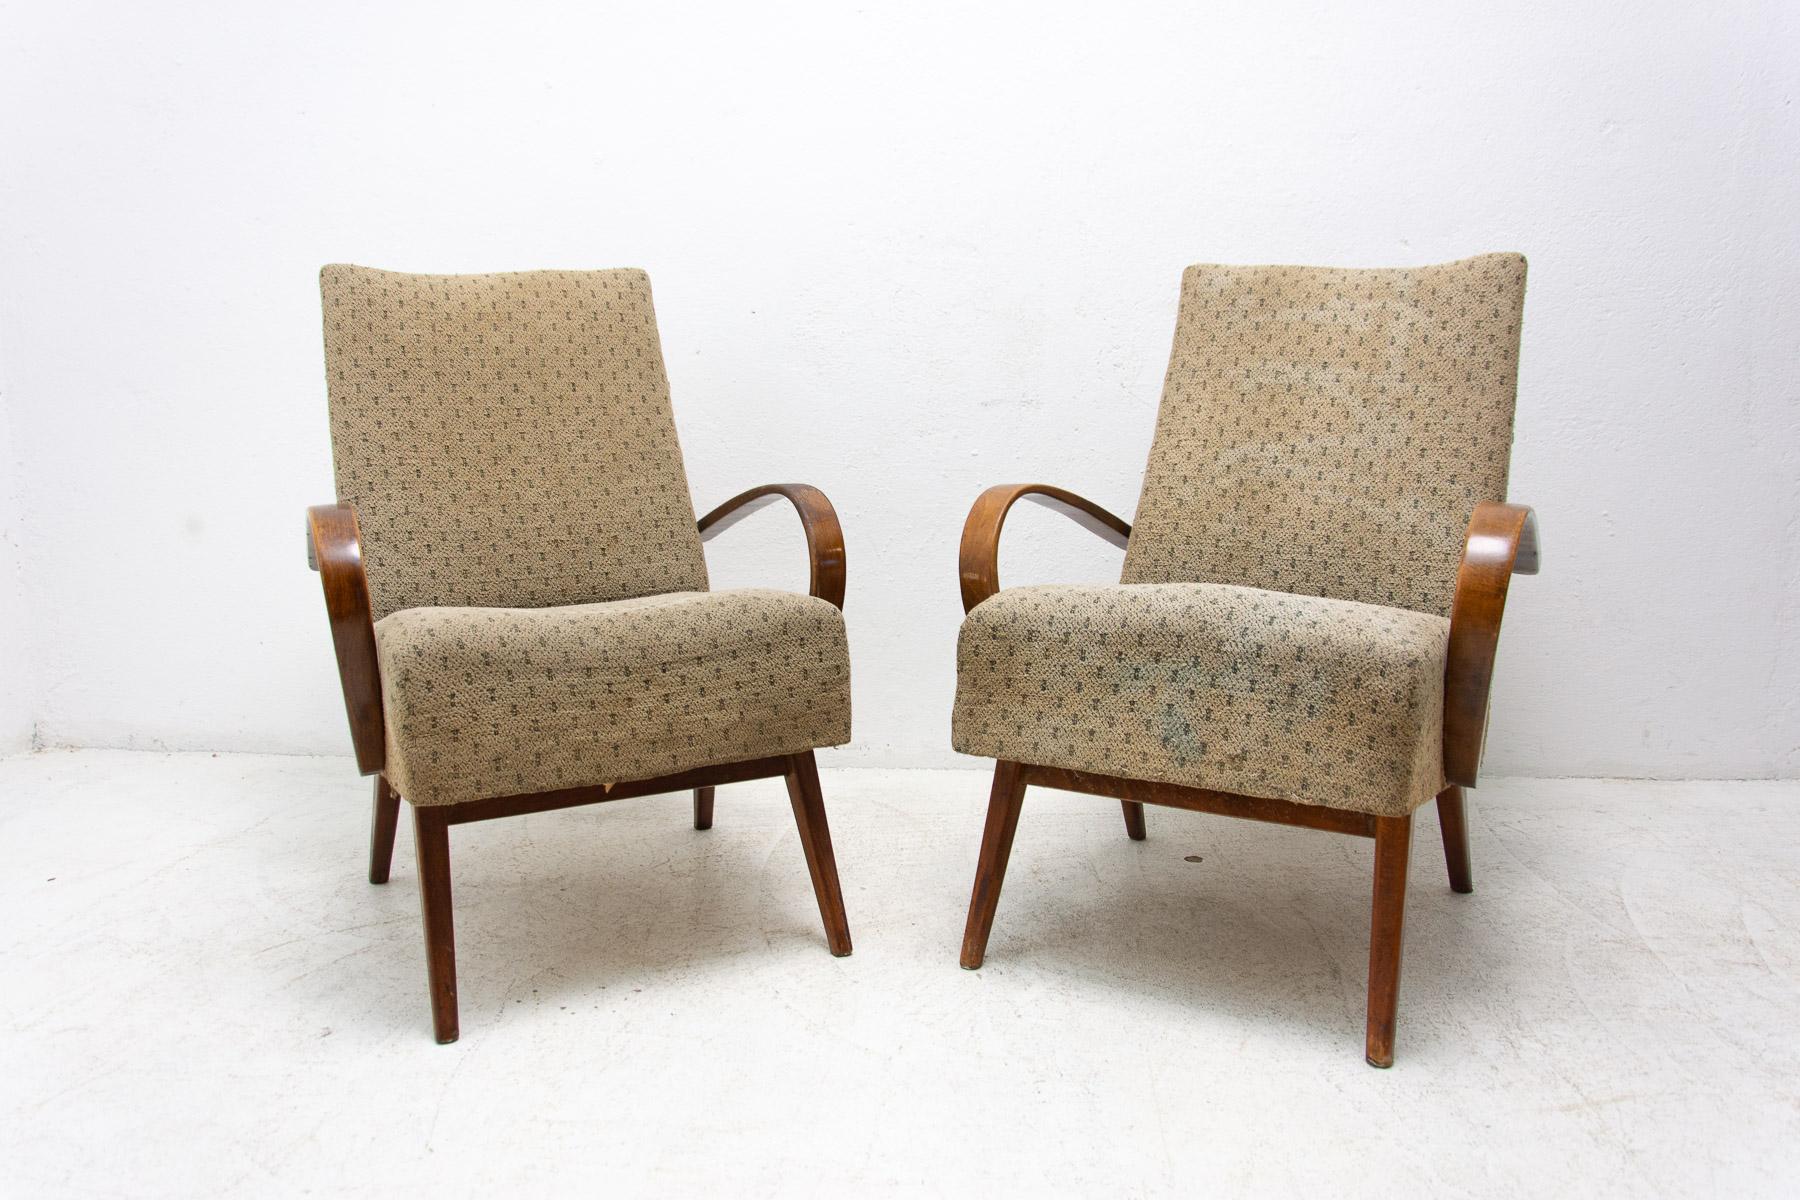 These bentwood armchairs were designed by Jaroslav Šmídek and made in the former Czechoslovakia in the 1960´s.

The chairs are stable. They are in good structure condition, the upholstery is in poor condition and needs to be reupholstered.

Made